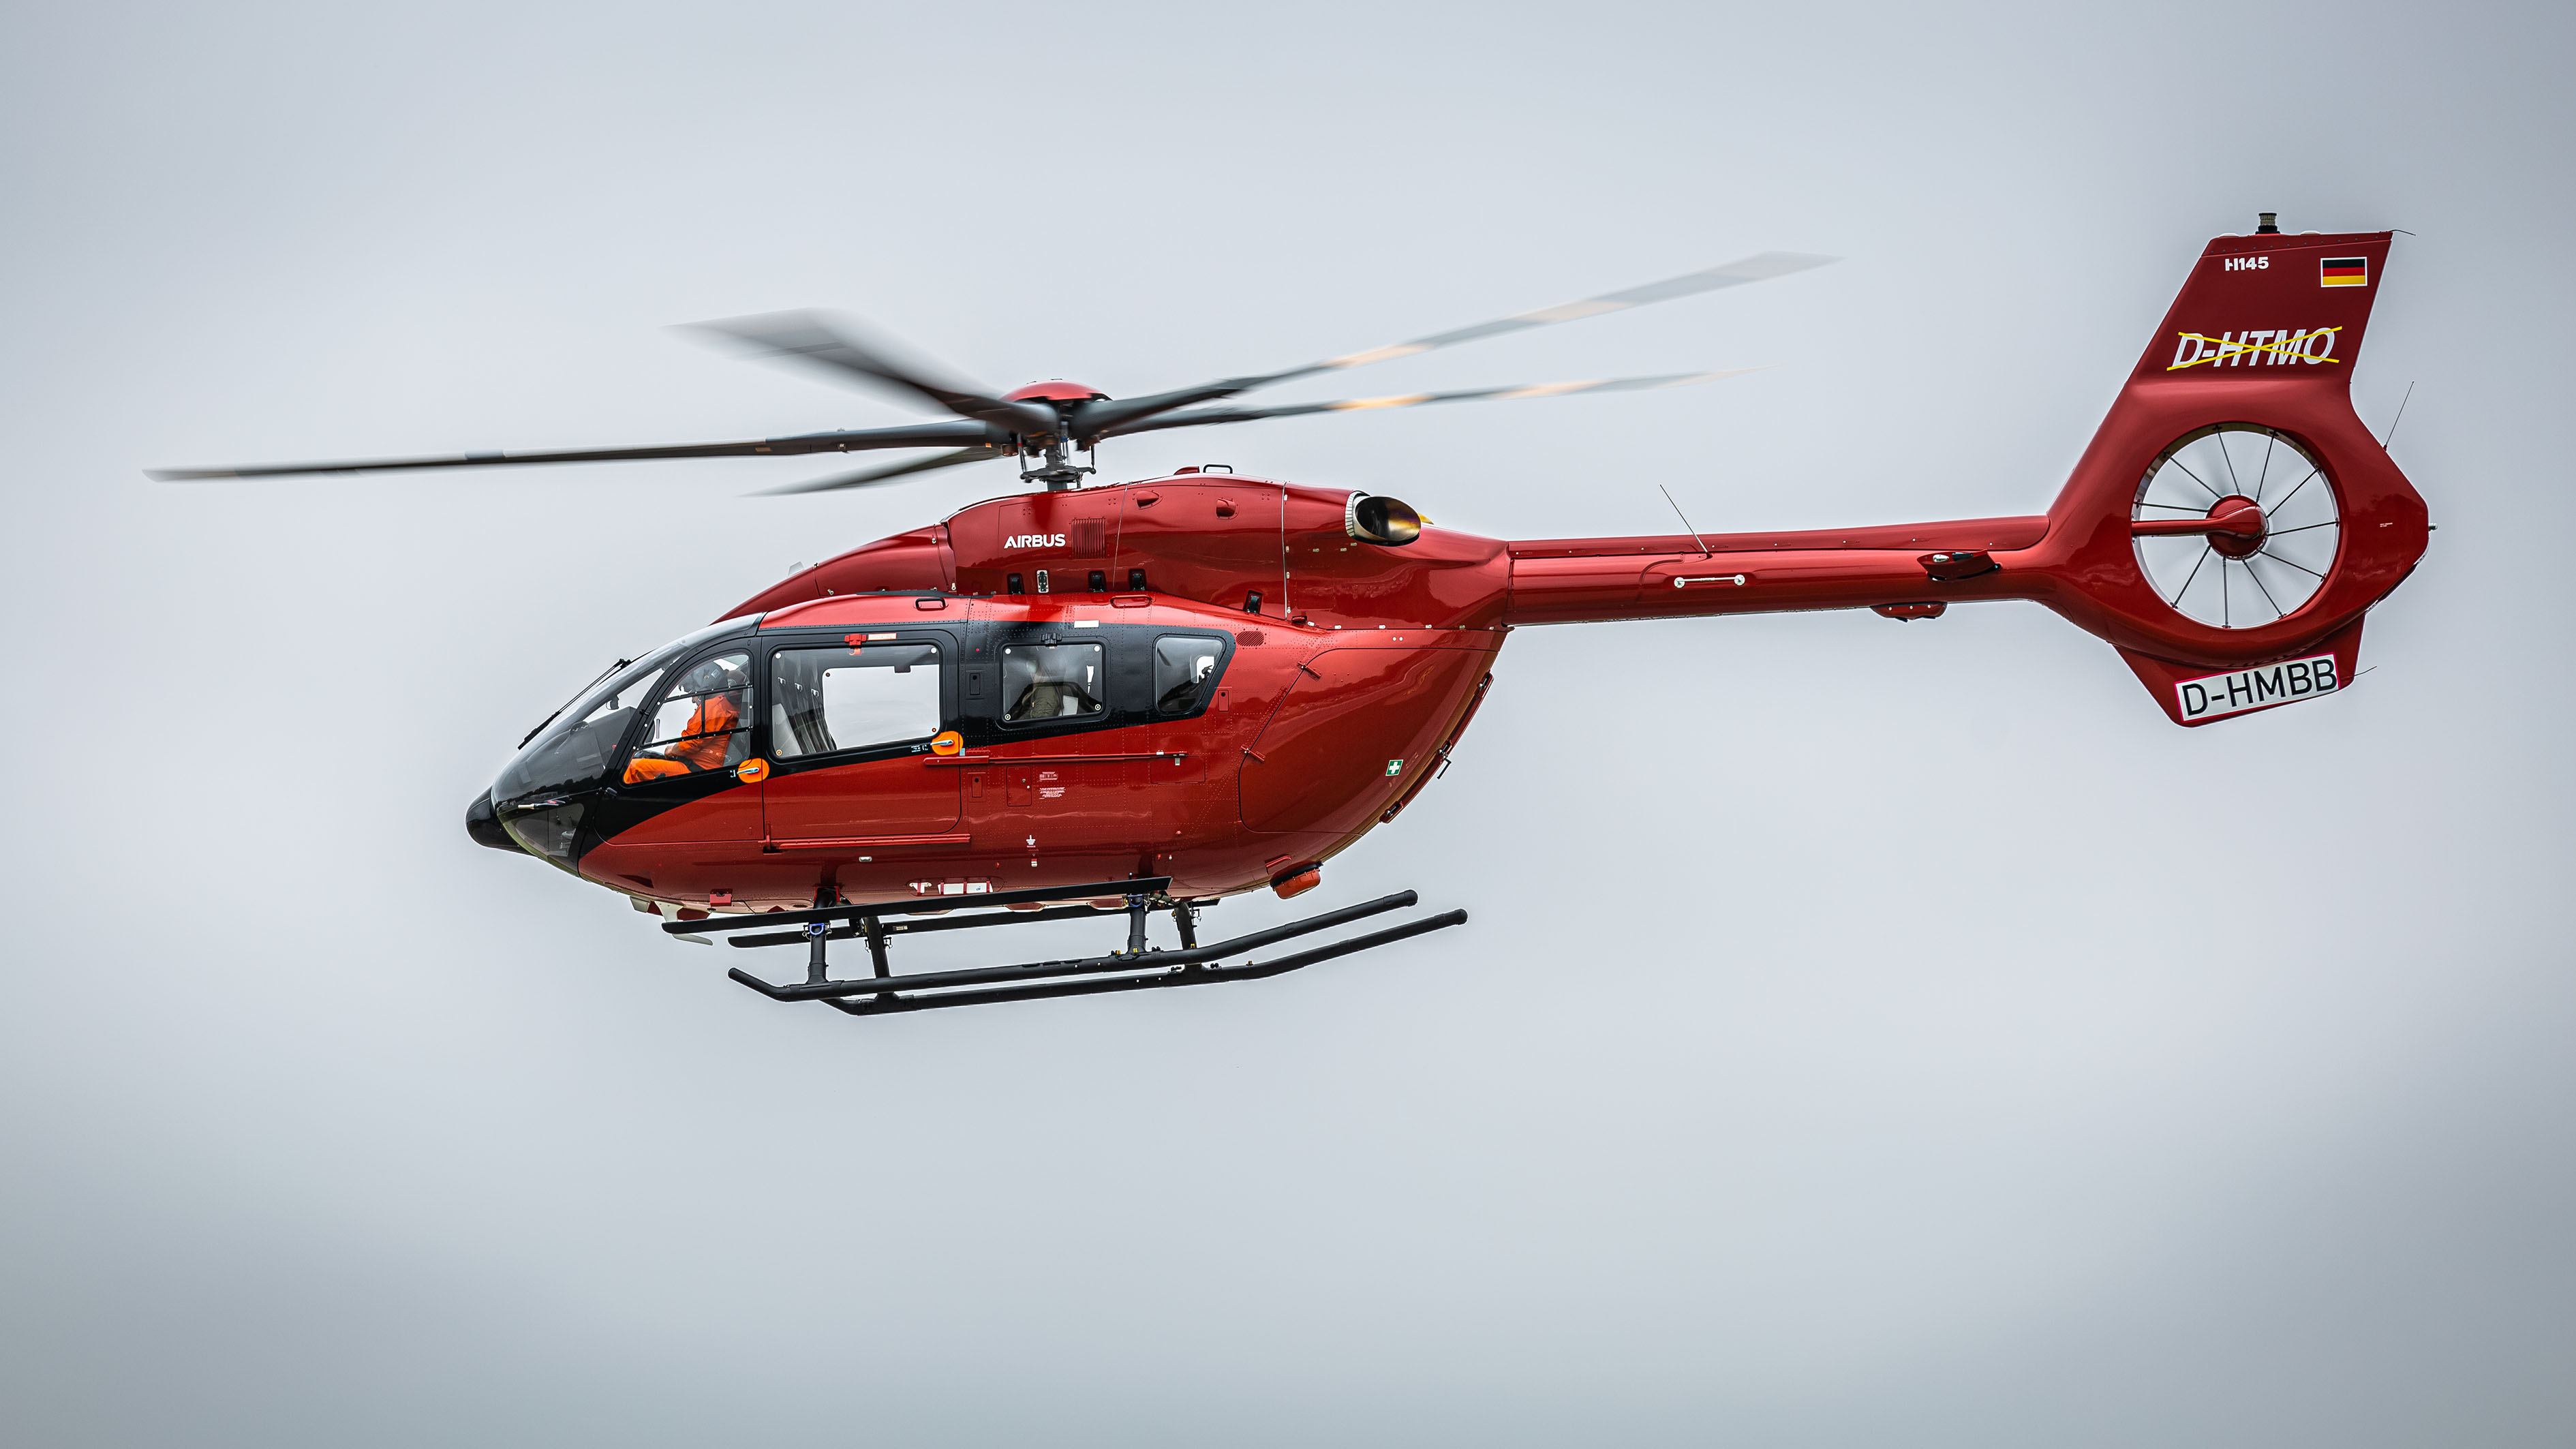 DOPH-0776-018-Copyright-Airbus-Helicopters_0.jpg